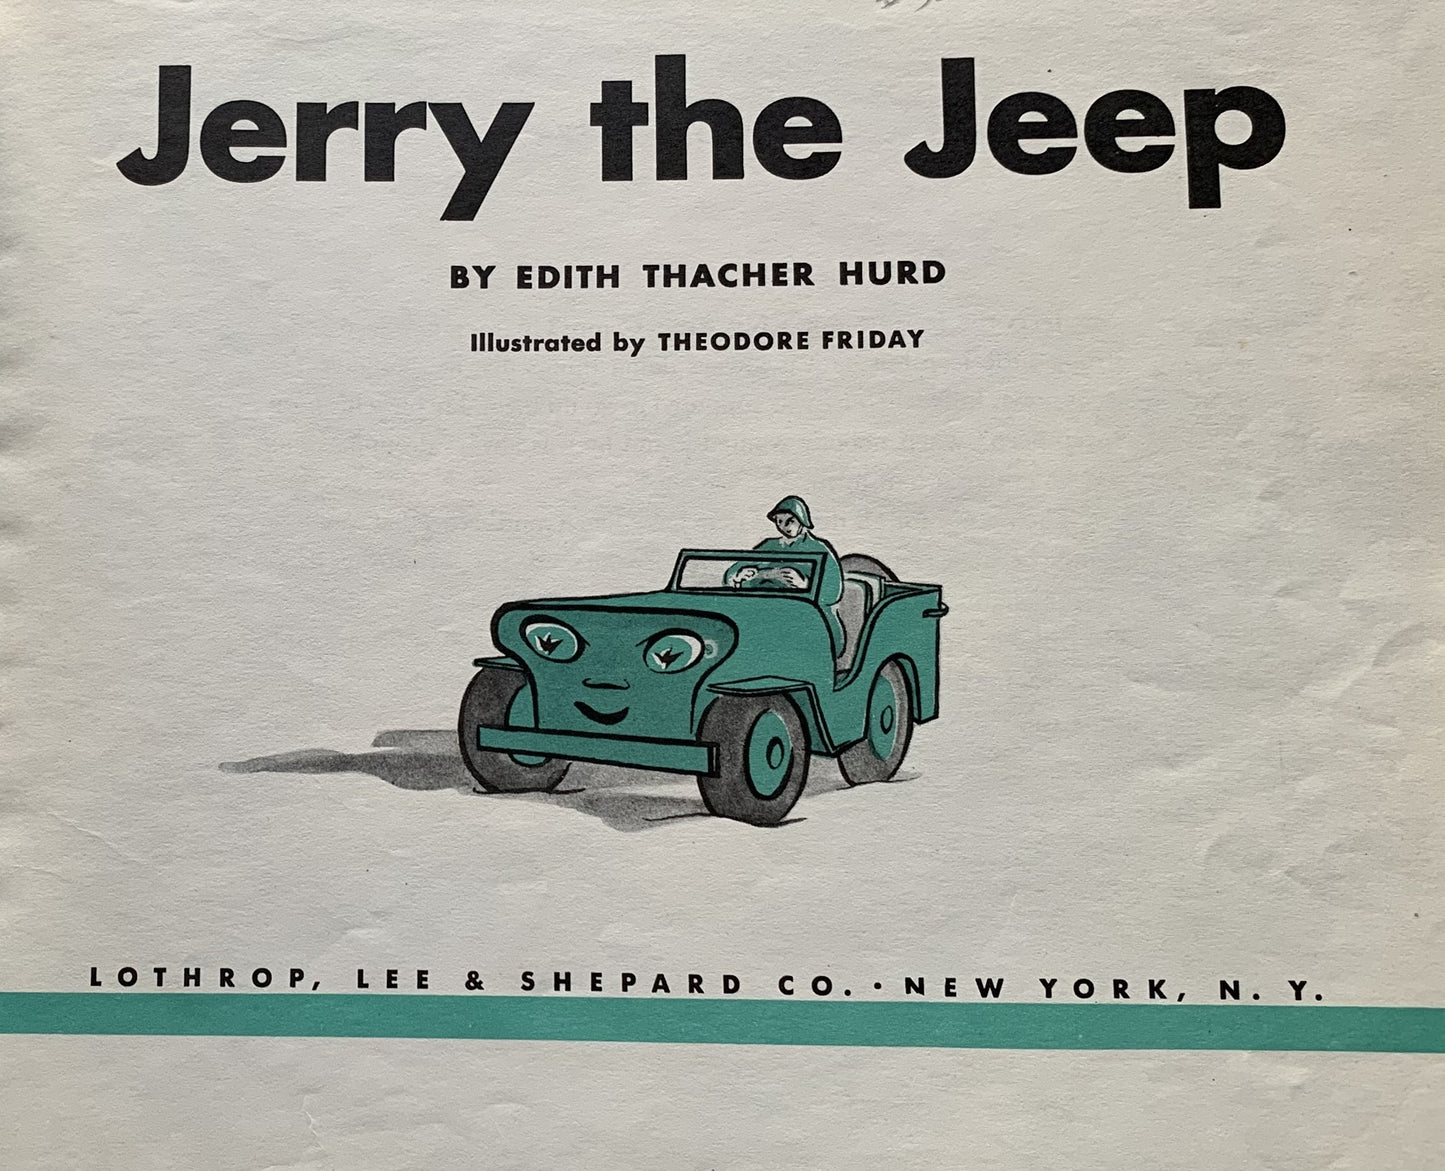 Jerry the Jeep